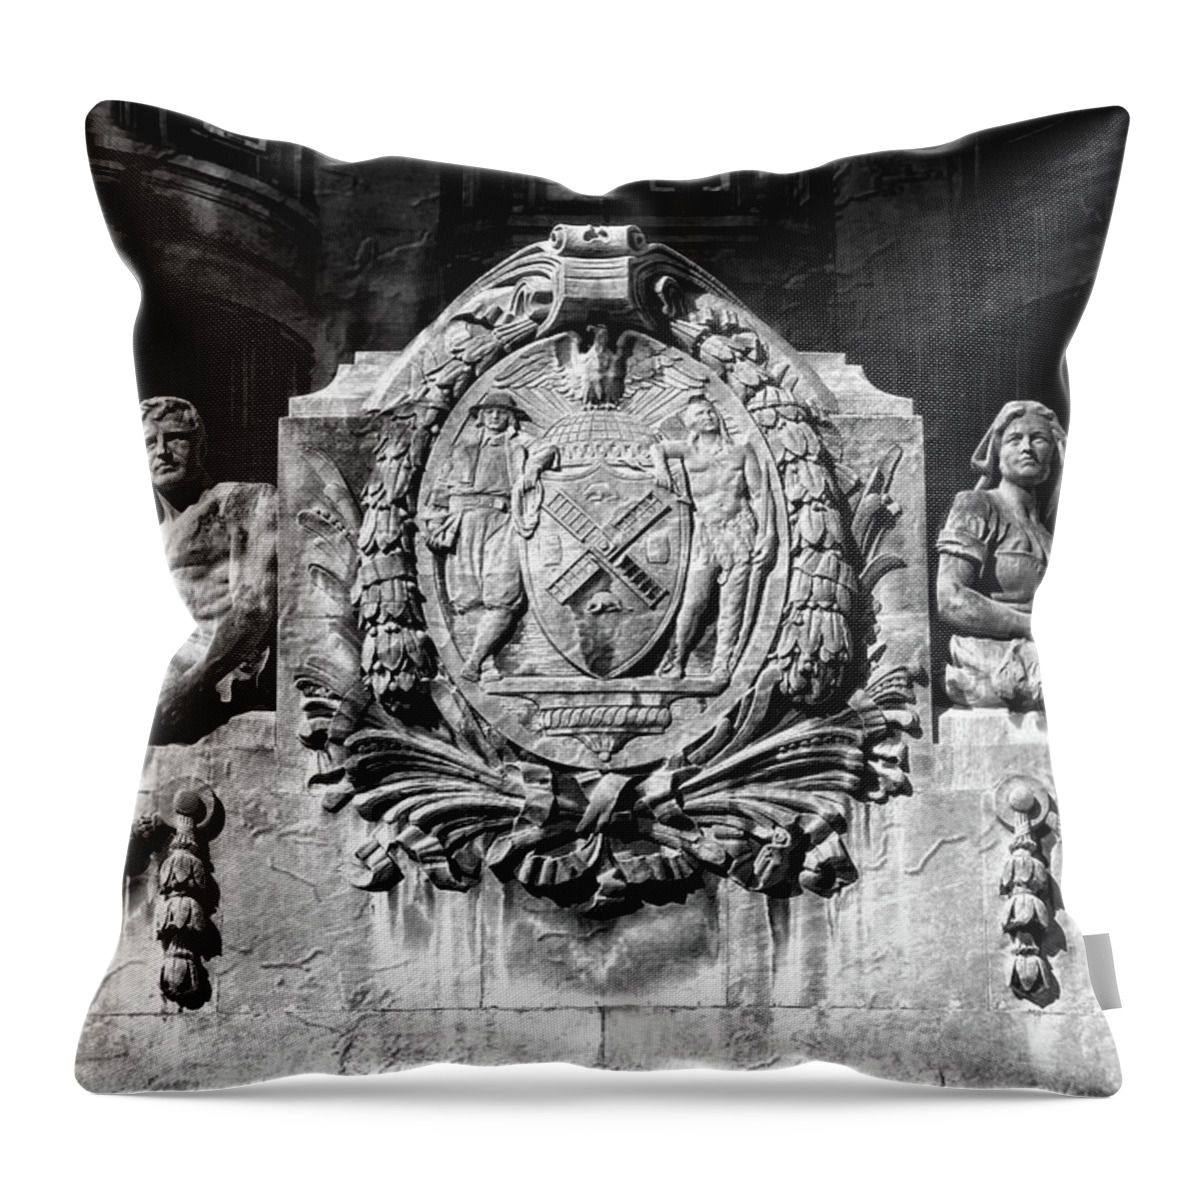 Architectecture Throw Pillow featuring the photograph New York City Seal by DiDesigns Graphics